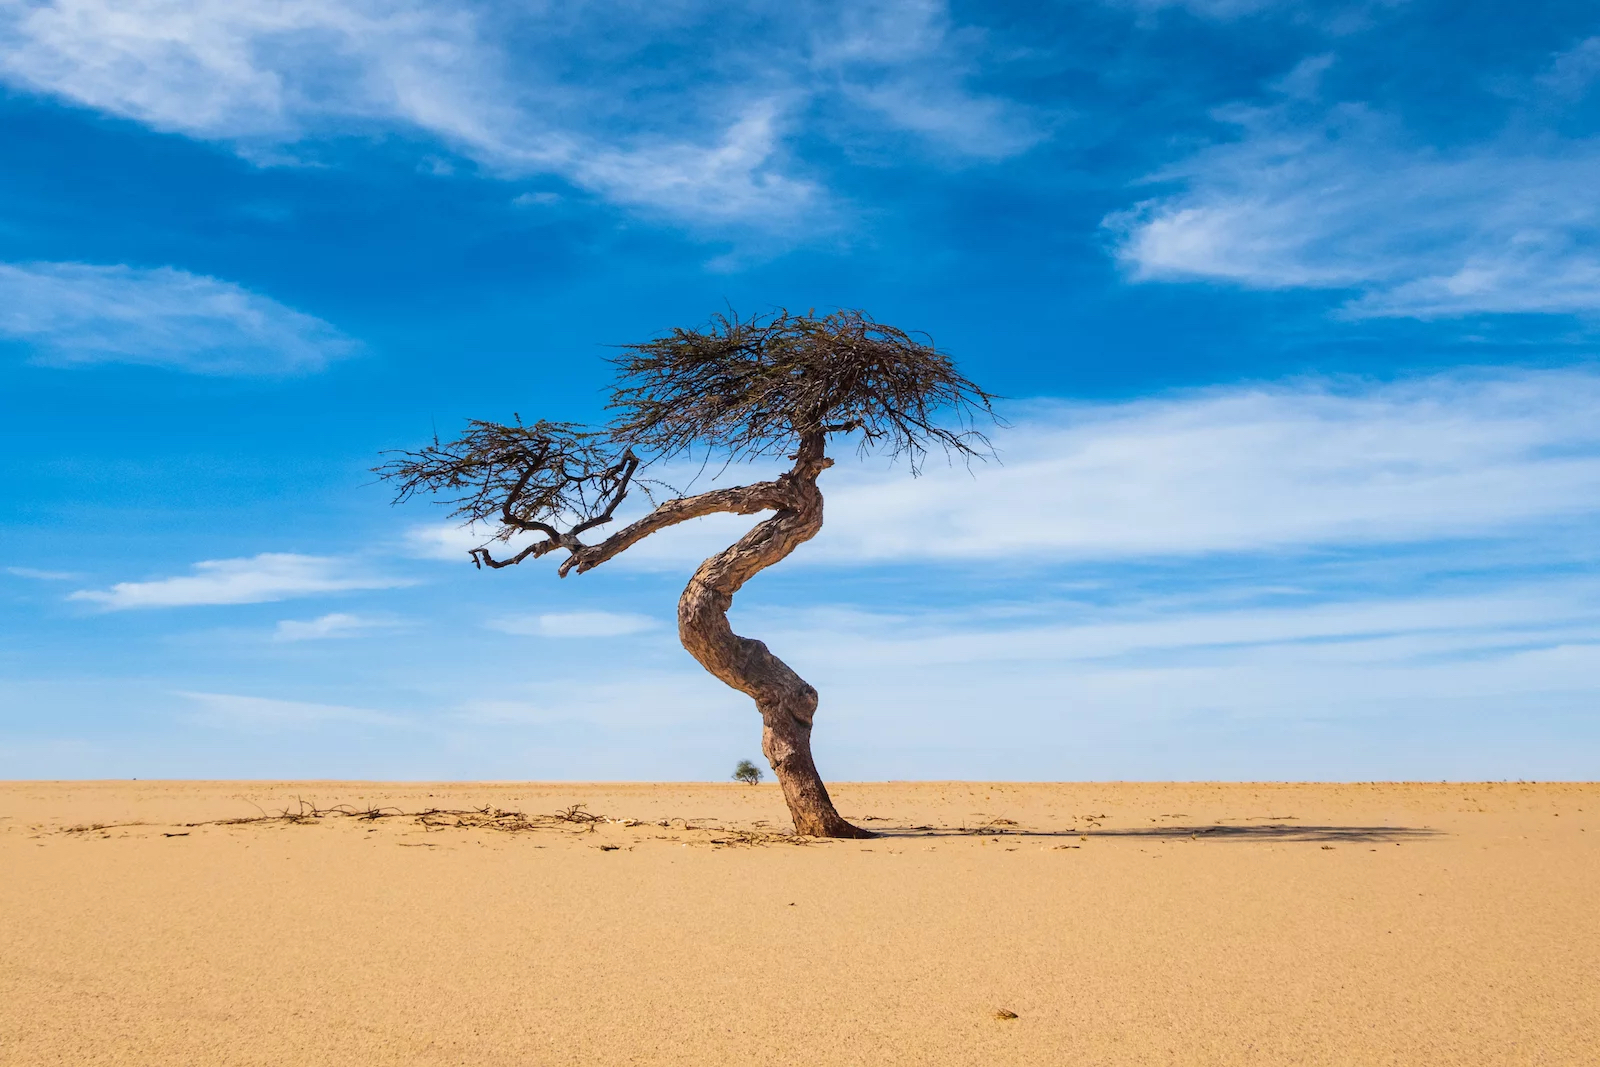 Lone tree in Africa